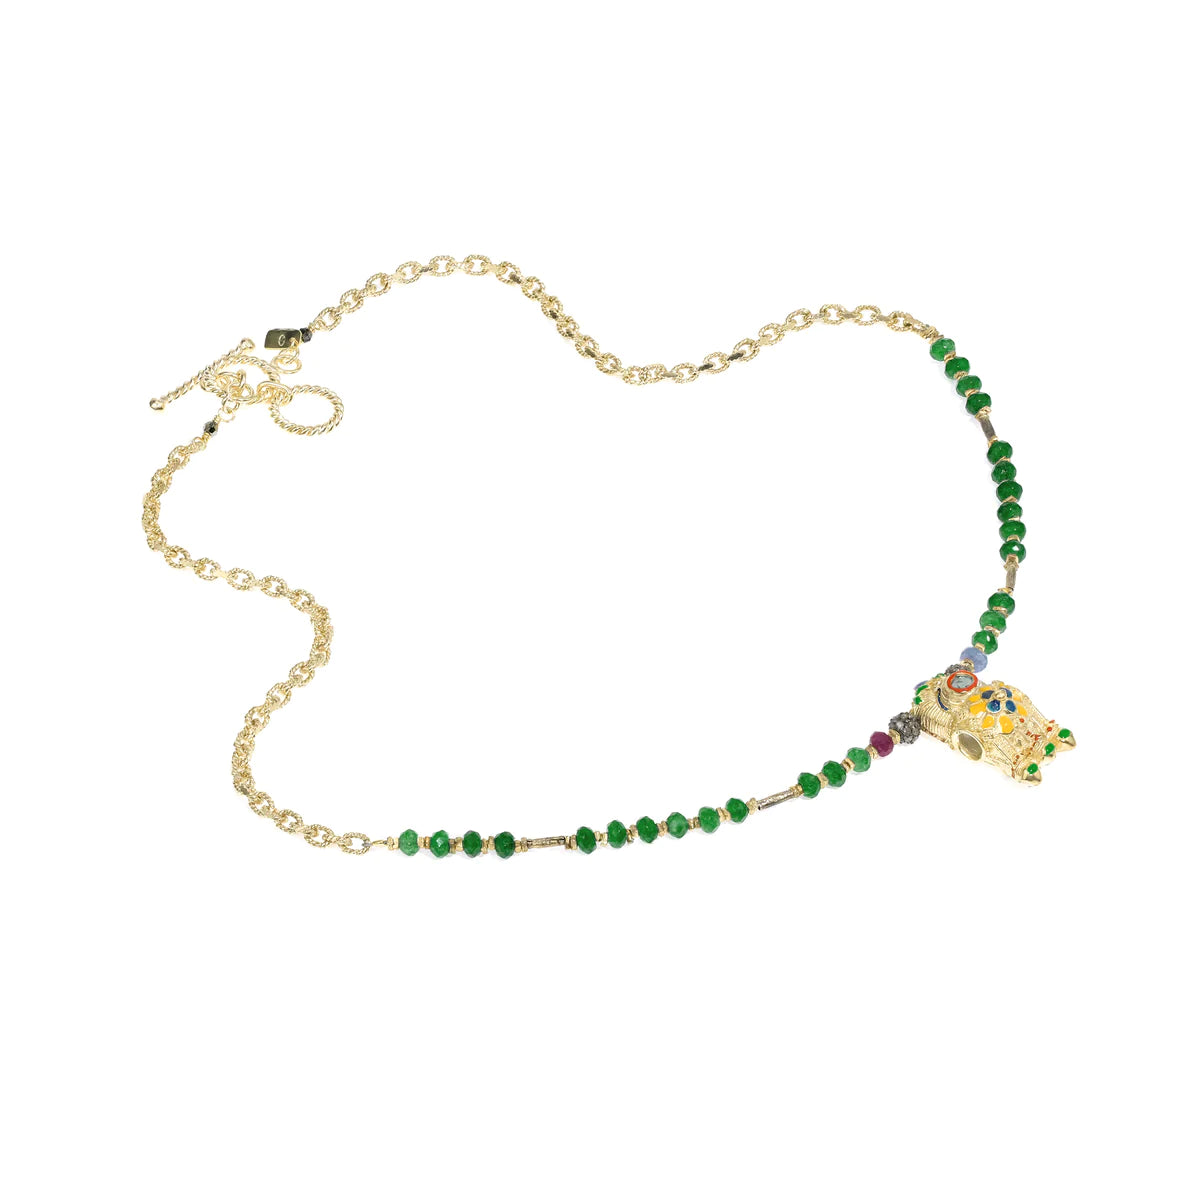 Collier Gold Multico - Marie Laure Chamorel